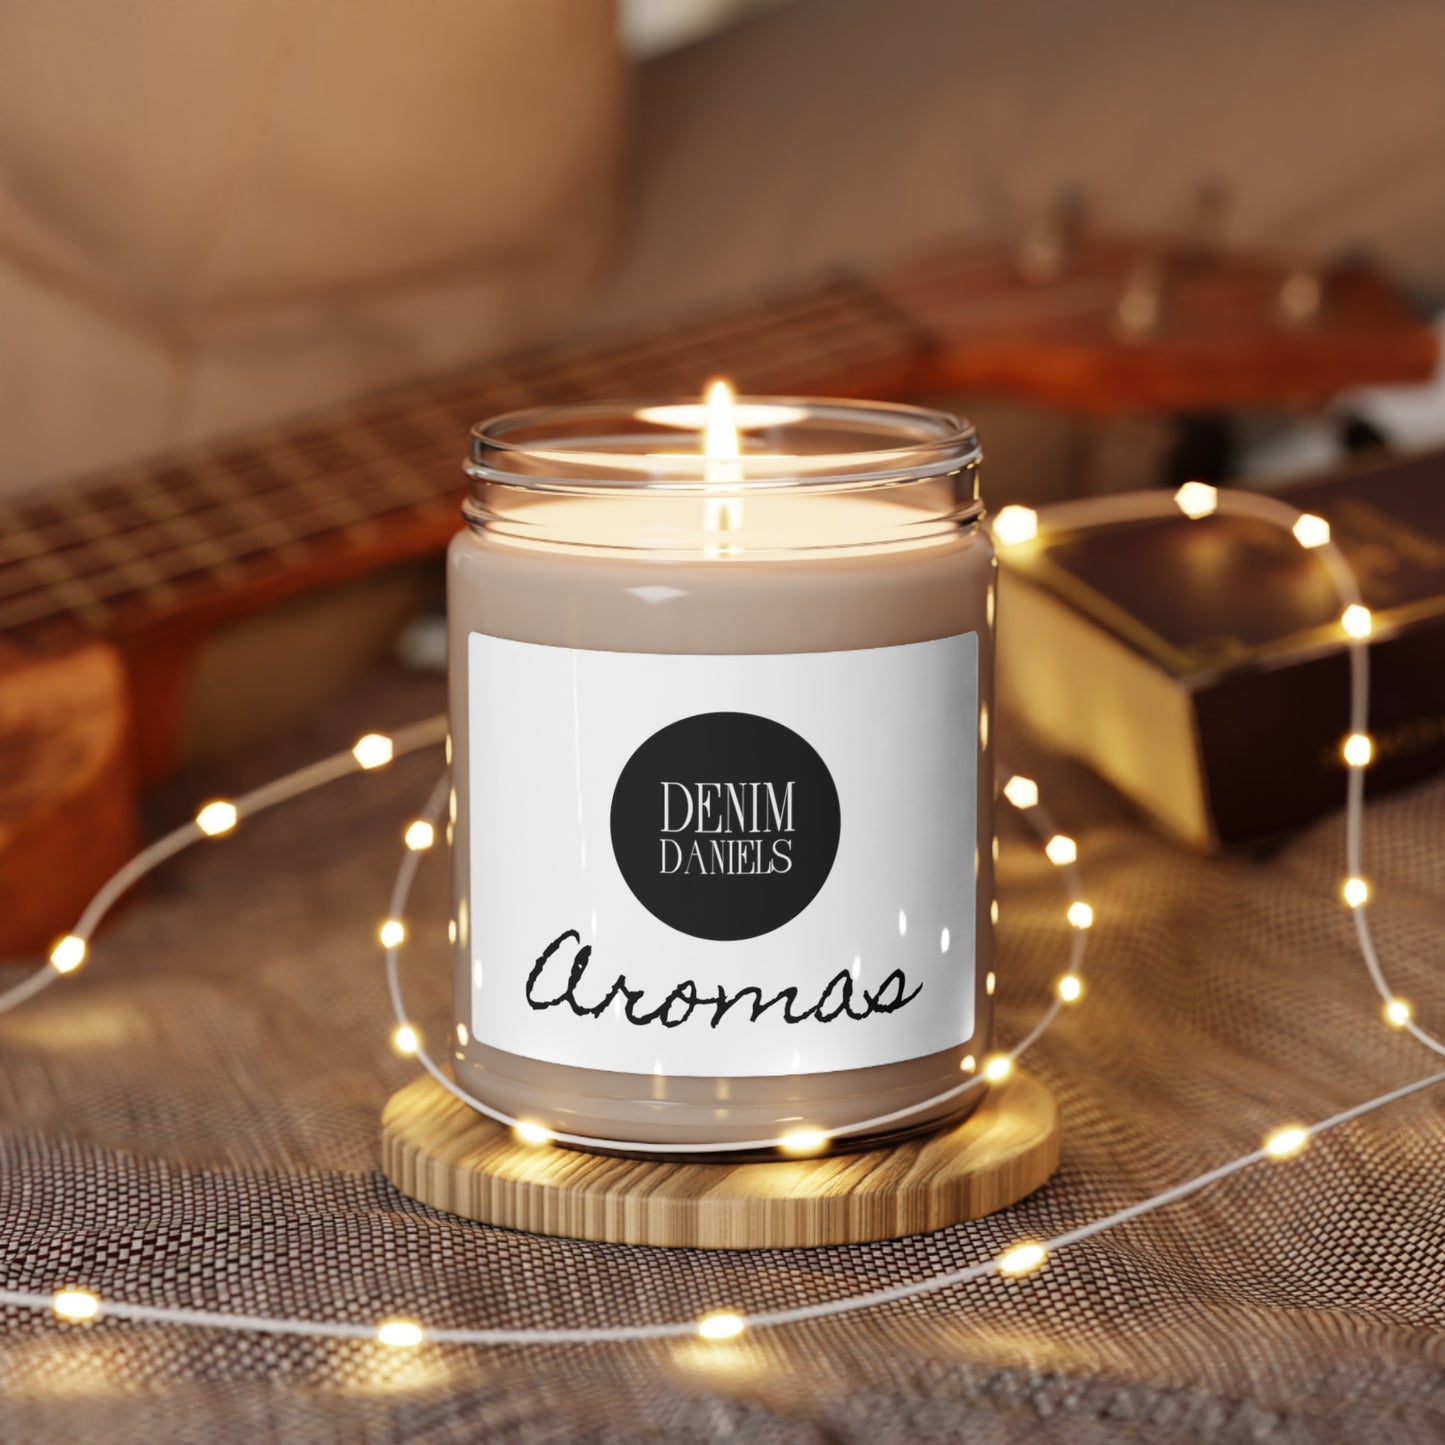 Demin Daniels Aromas Scented Soy Candle, 9oz